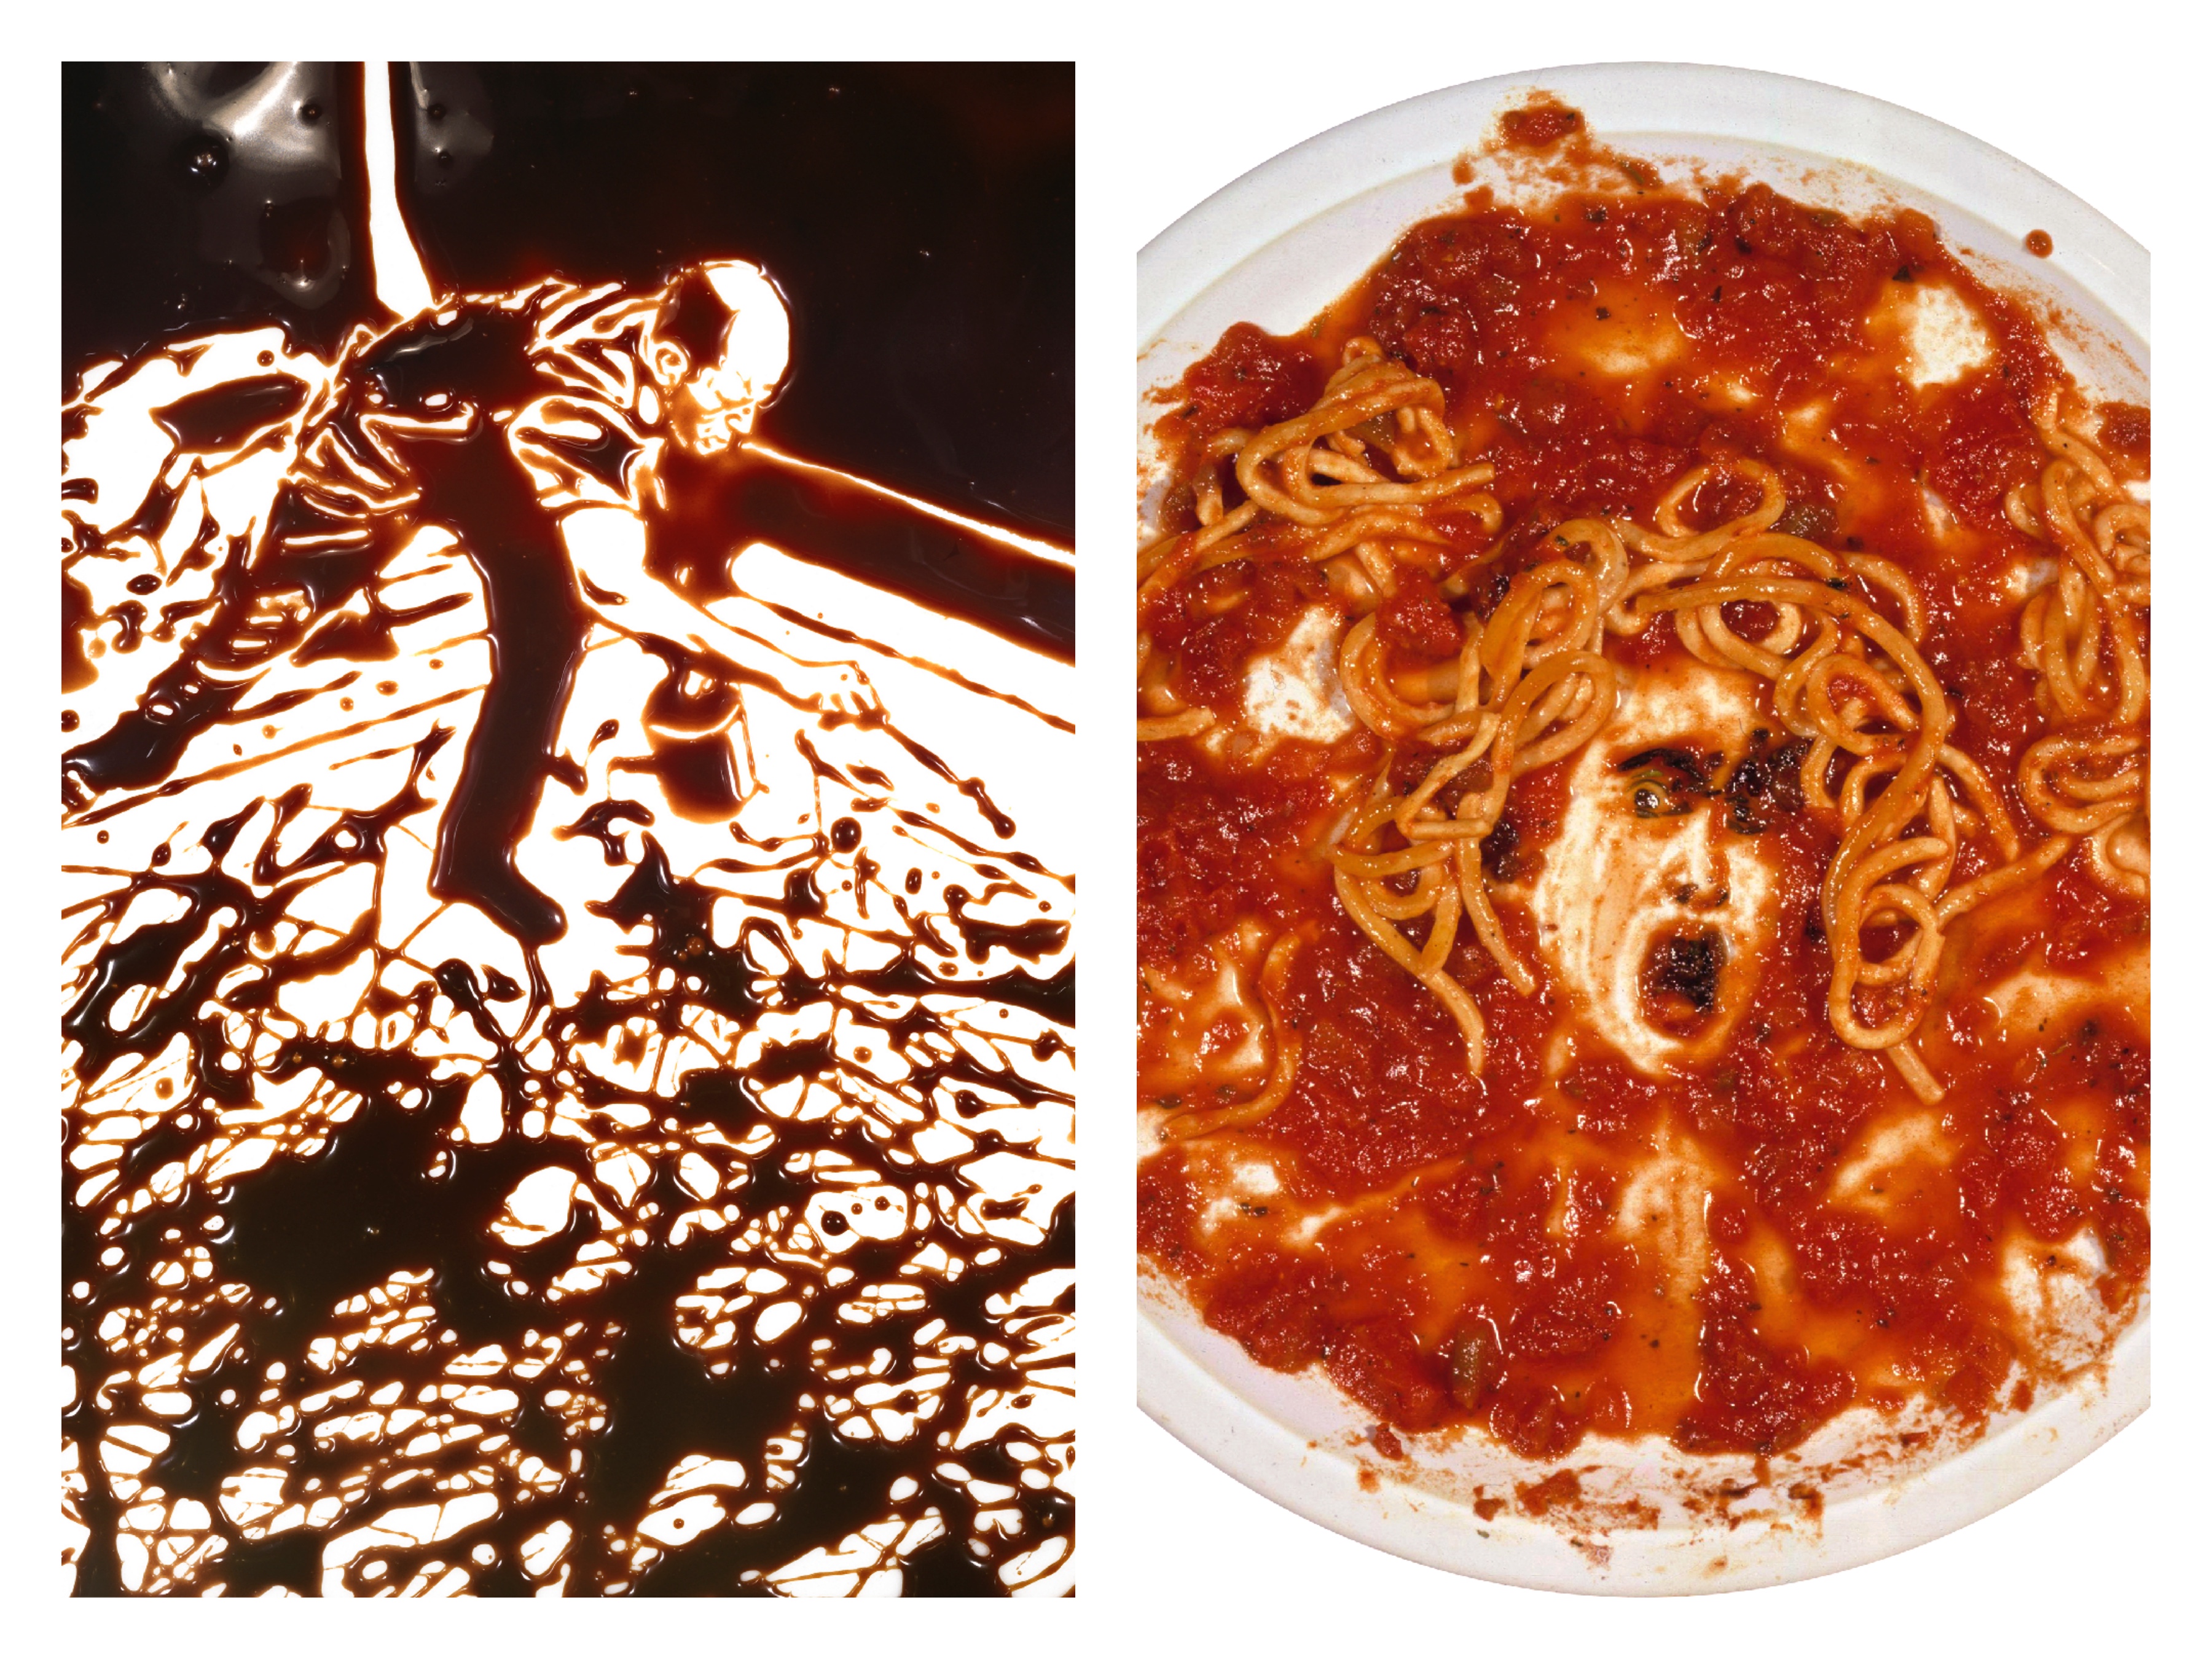 This Artist Recreates Iconic Images Out of Trash, Toys, and Chocolate Syrup